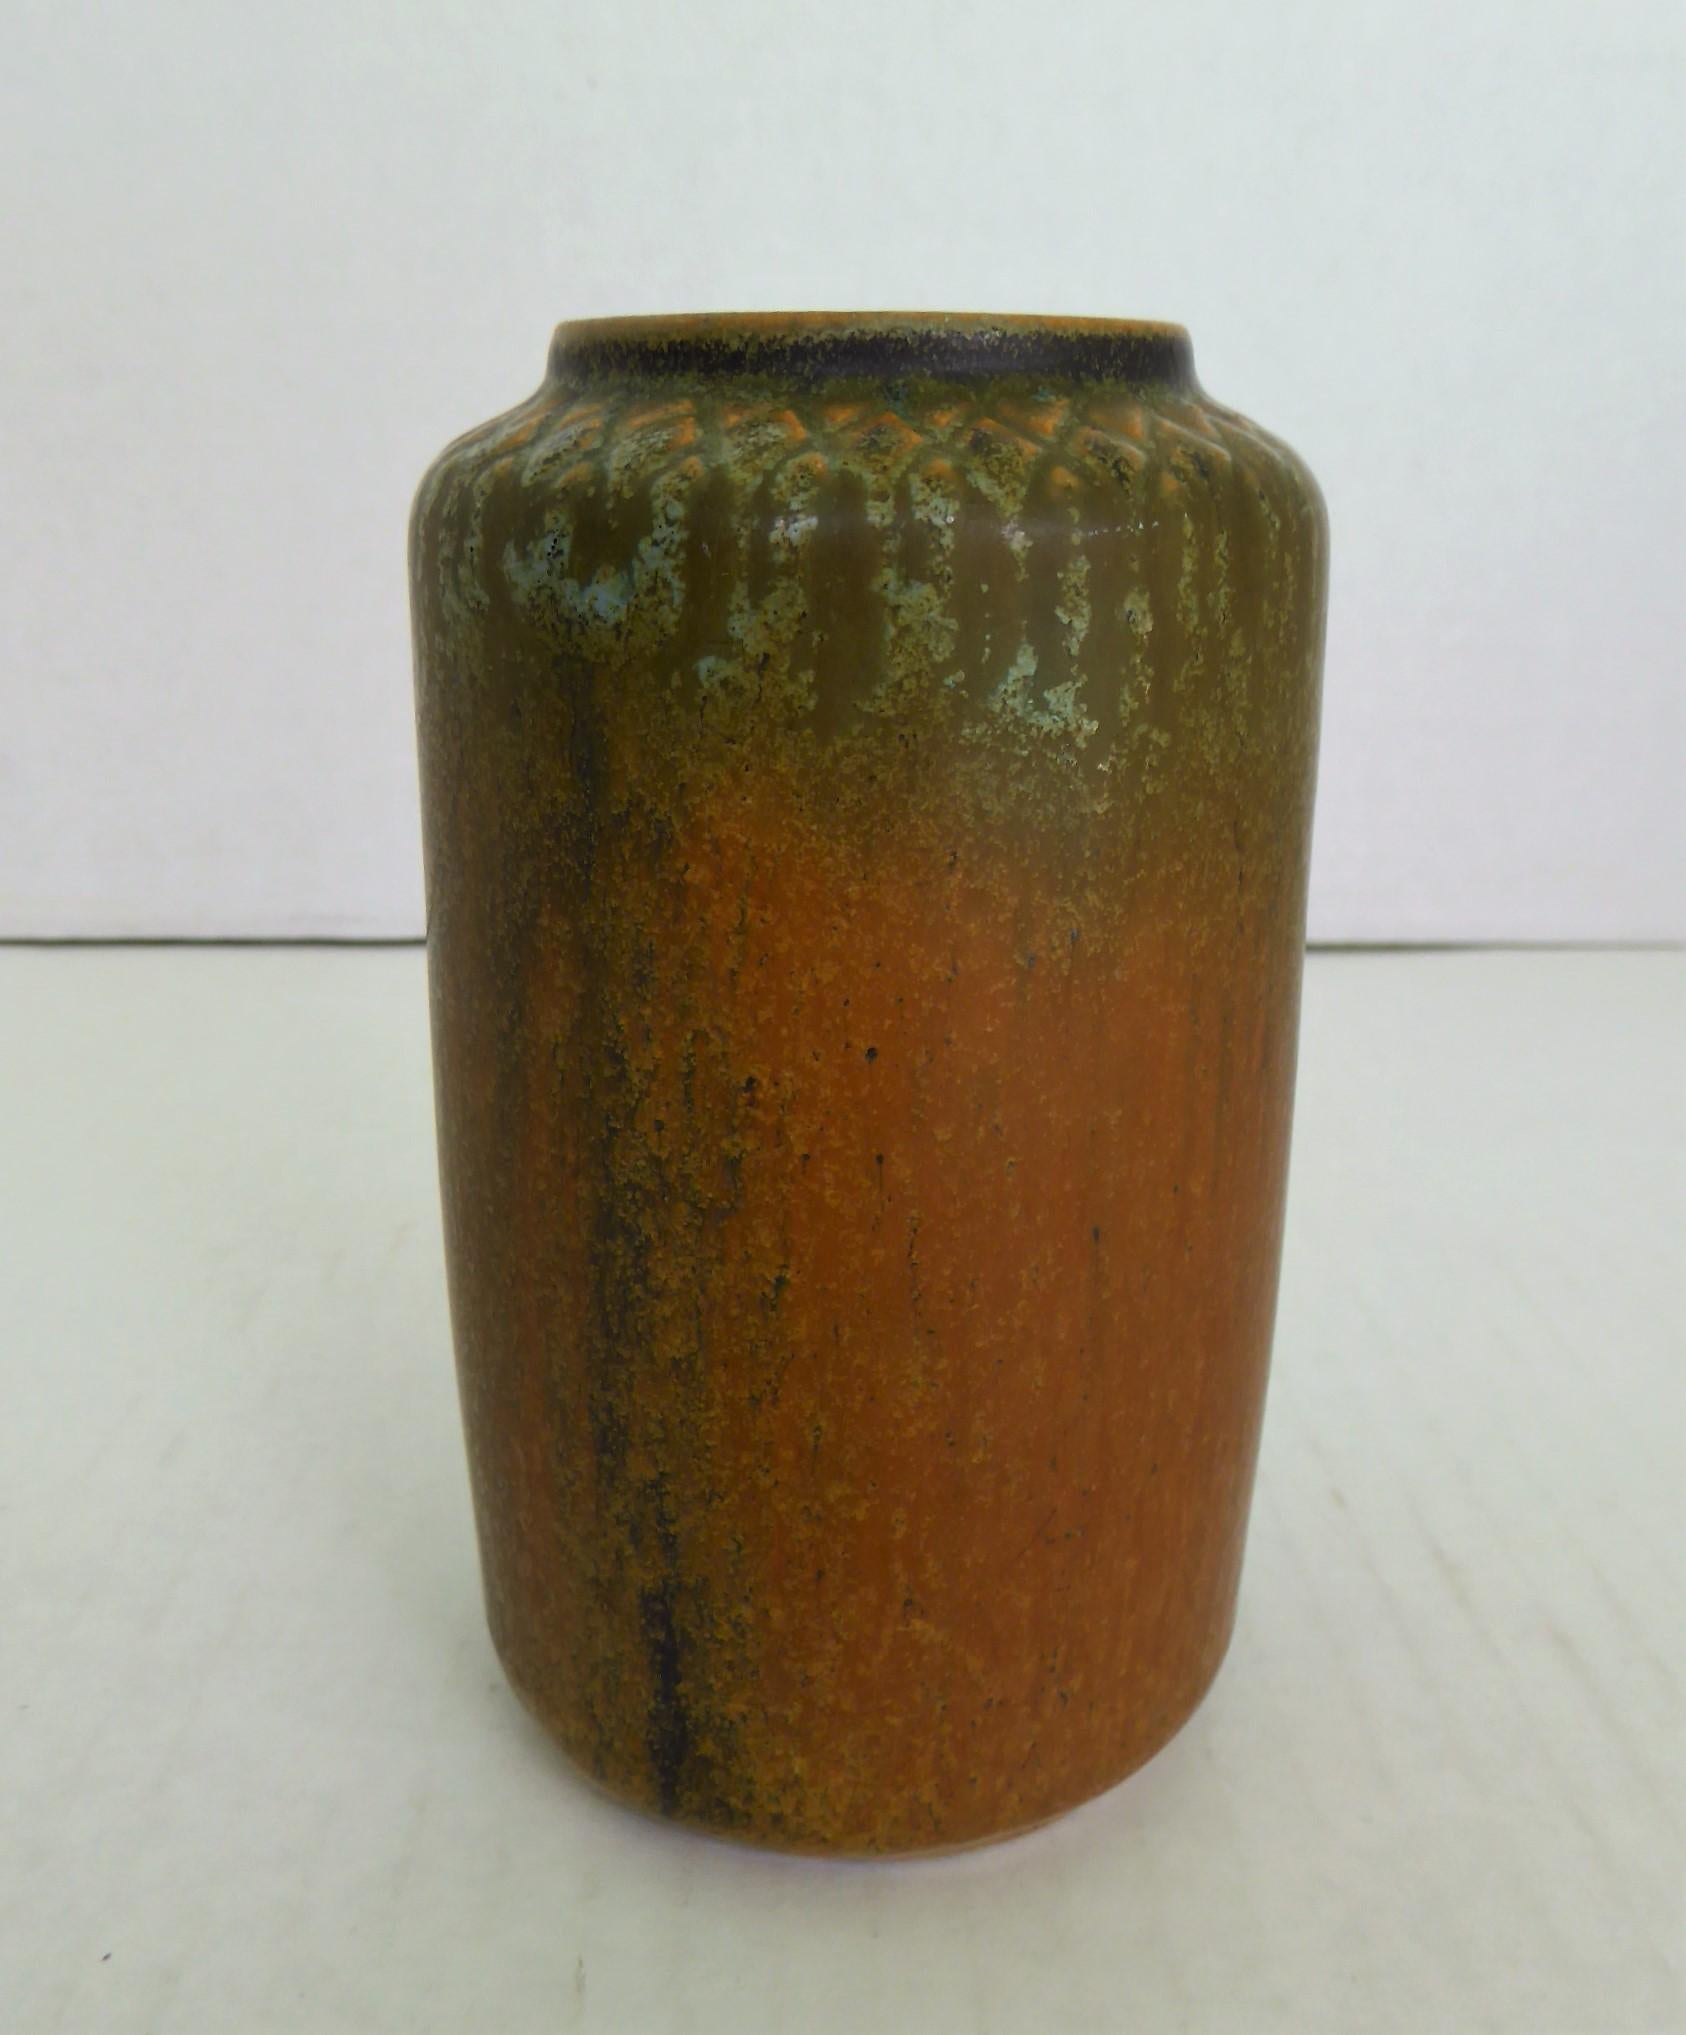 Danish Mid-Century Modern vase by Dane Ejvind Nielsen (1916-1988). Hand thrown and made in his atelier in the 1960s. There is not much information about Nielsen's life except that he spent time in England, Spain and he worked for a time at Royal